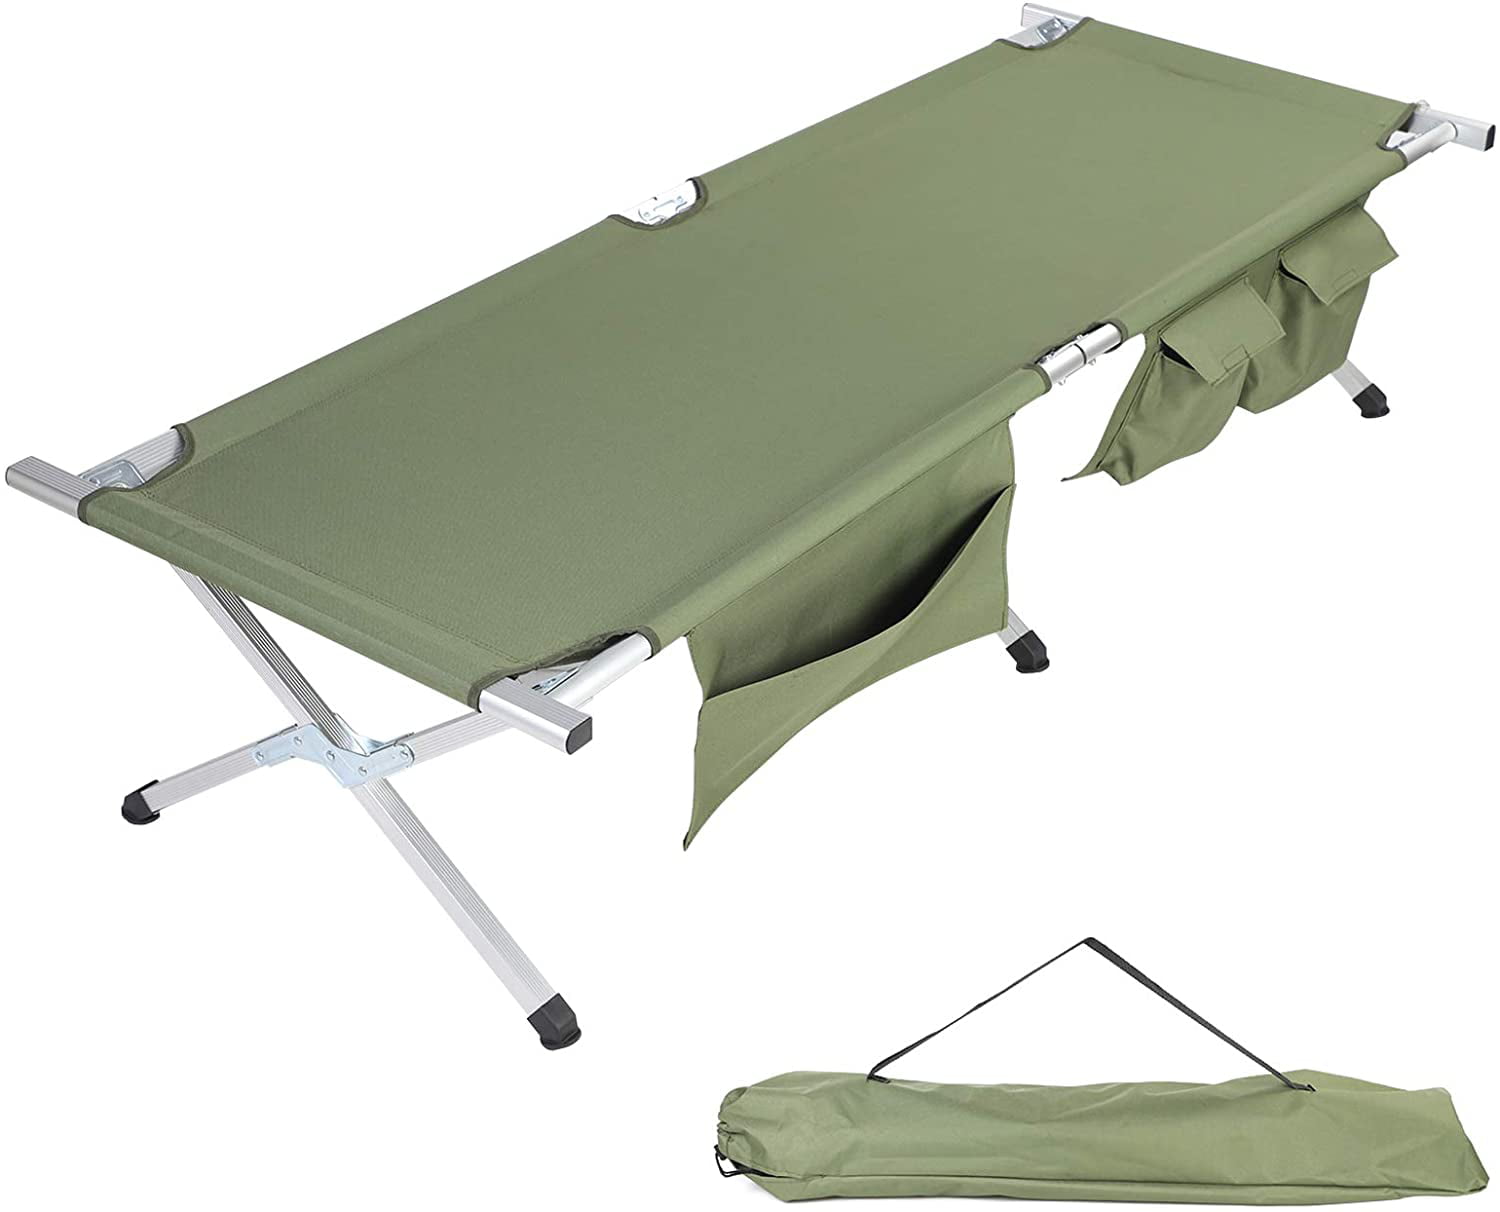 Military Style Aluminium Black Camp Bed side pocket Lightweight and Strong